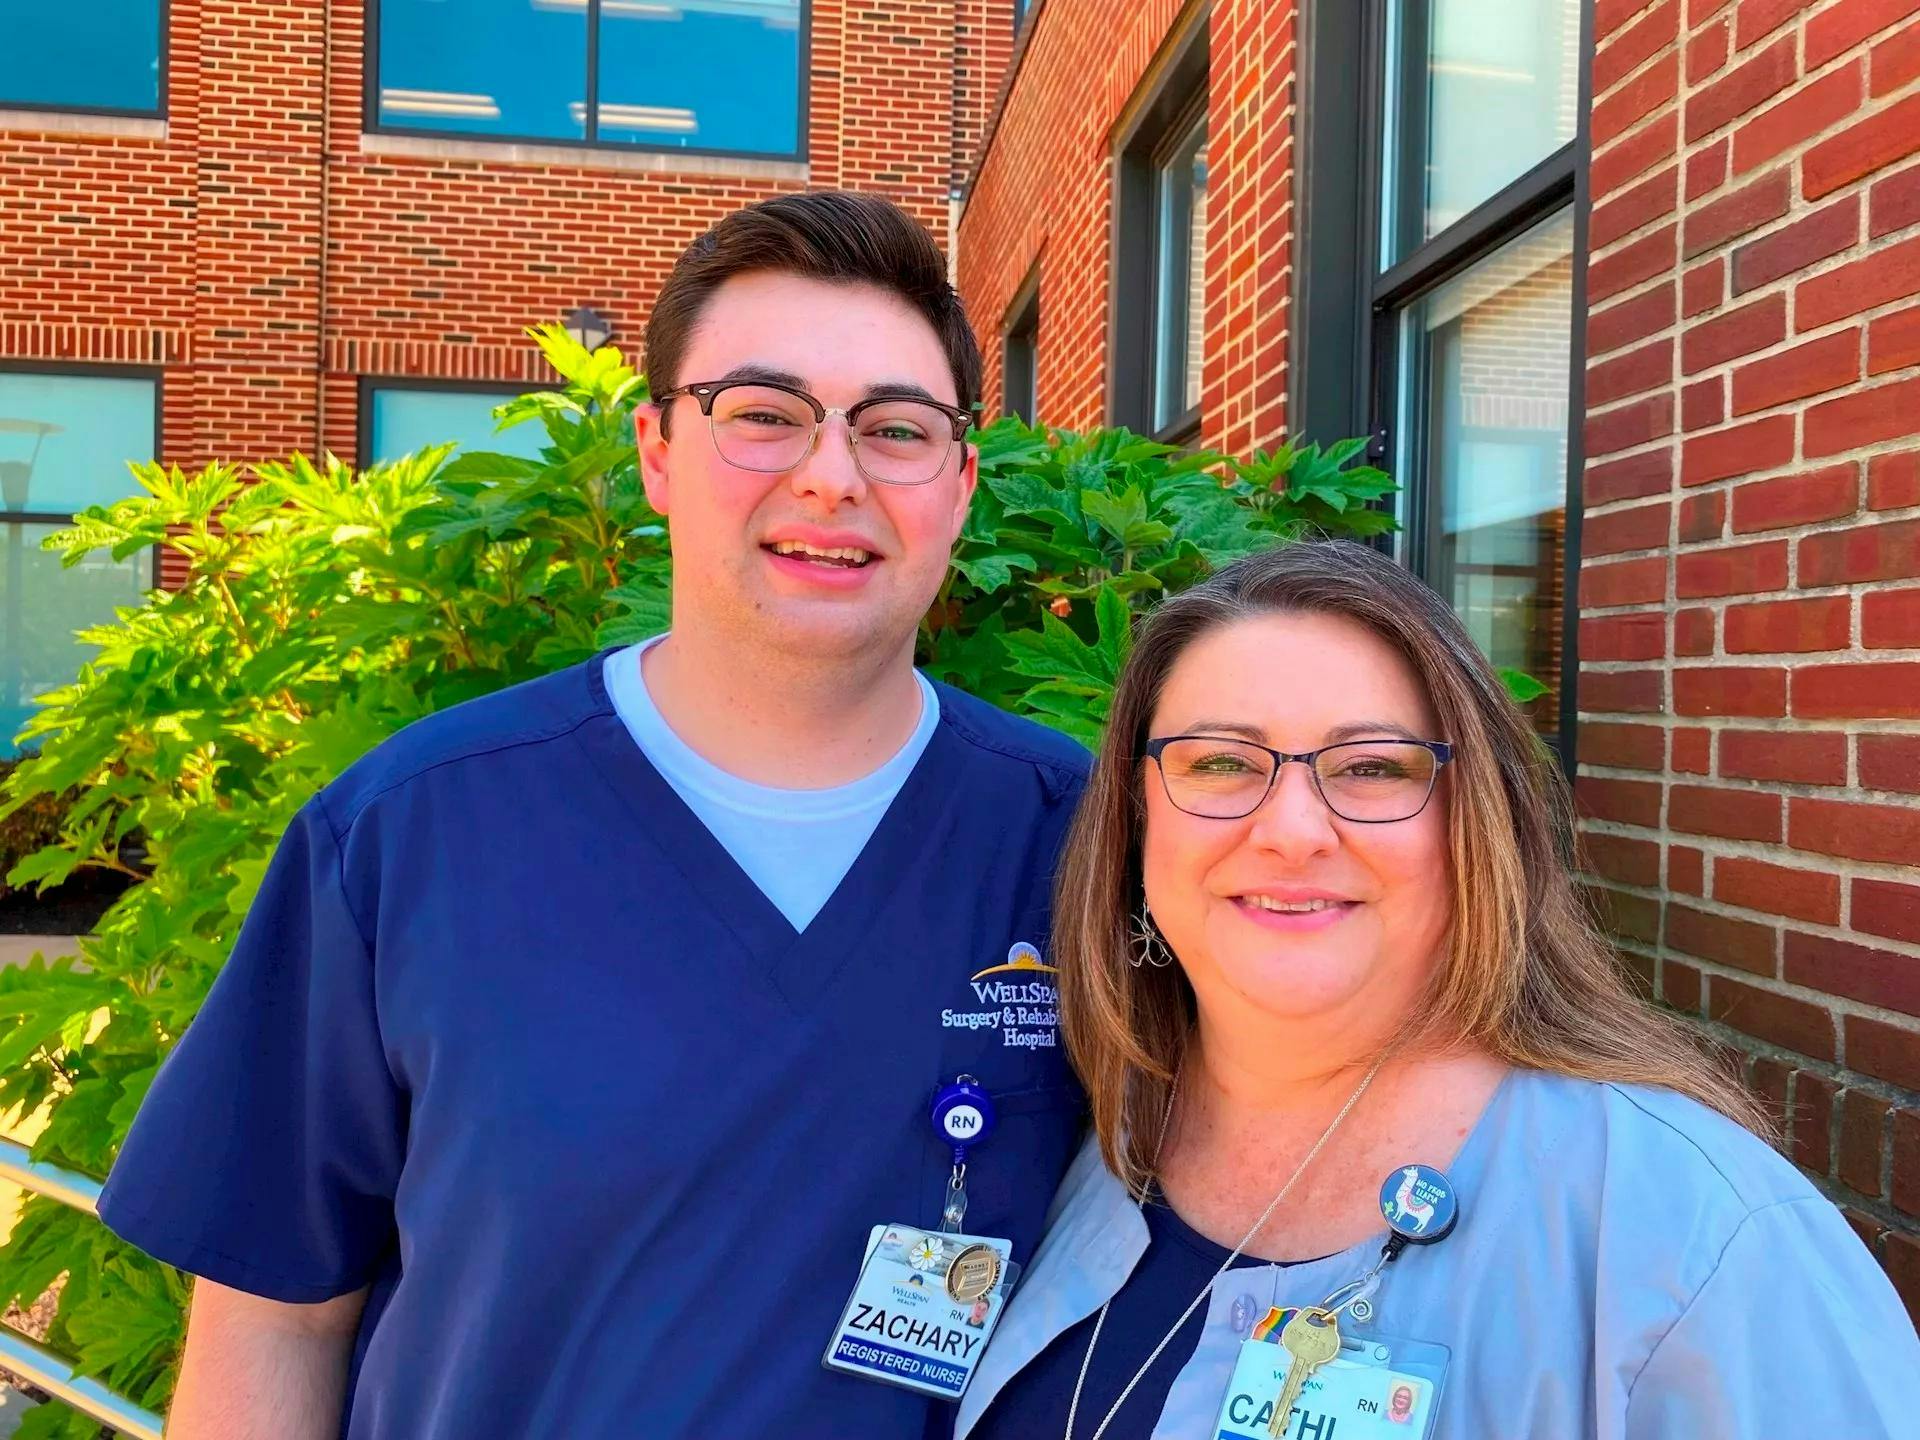 A Mother's Day tale: Meet a mom who inspired her son to go into nursing